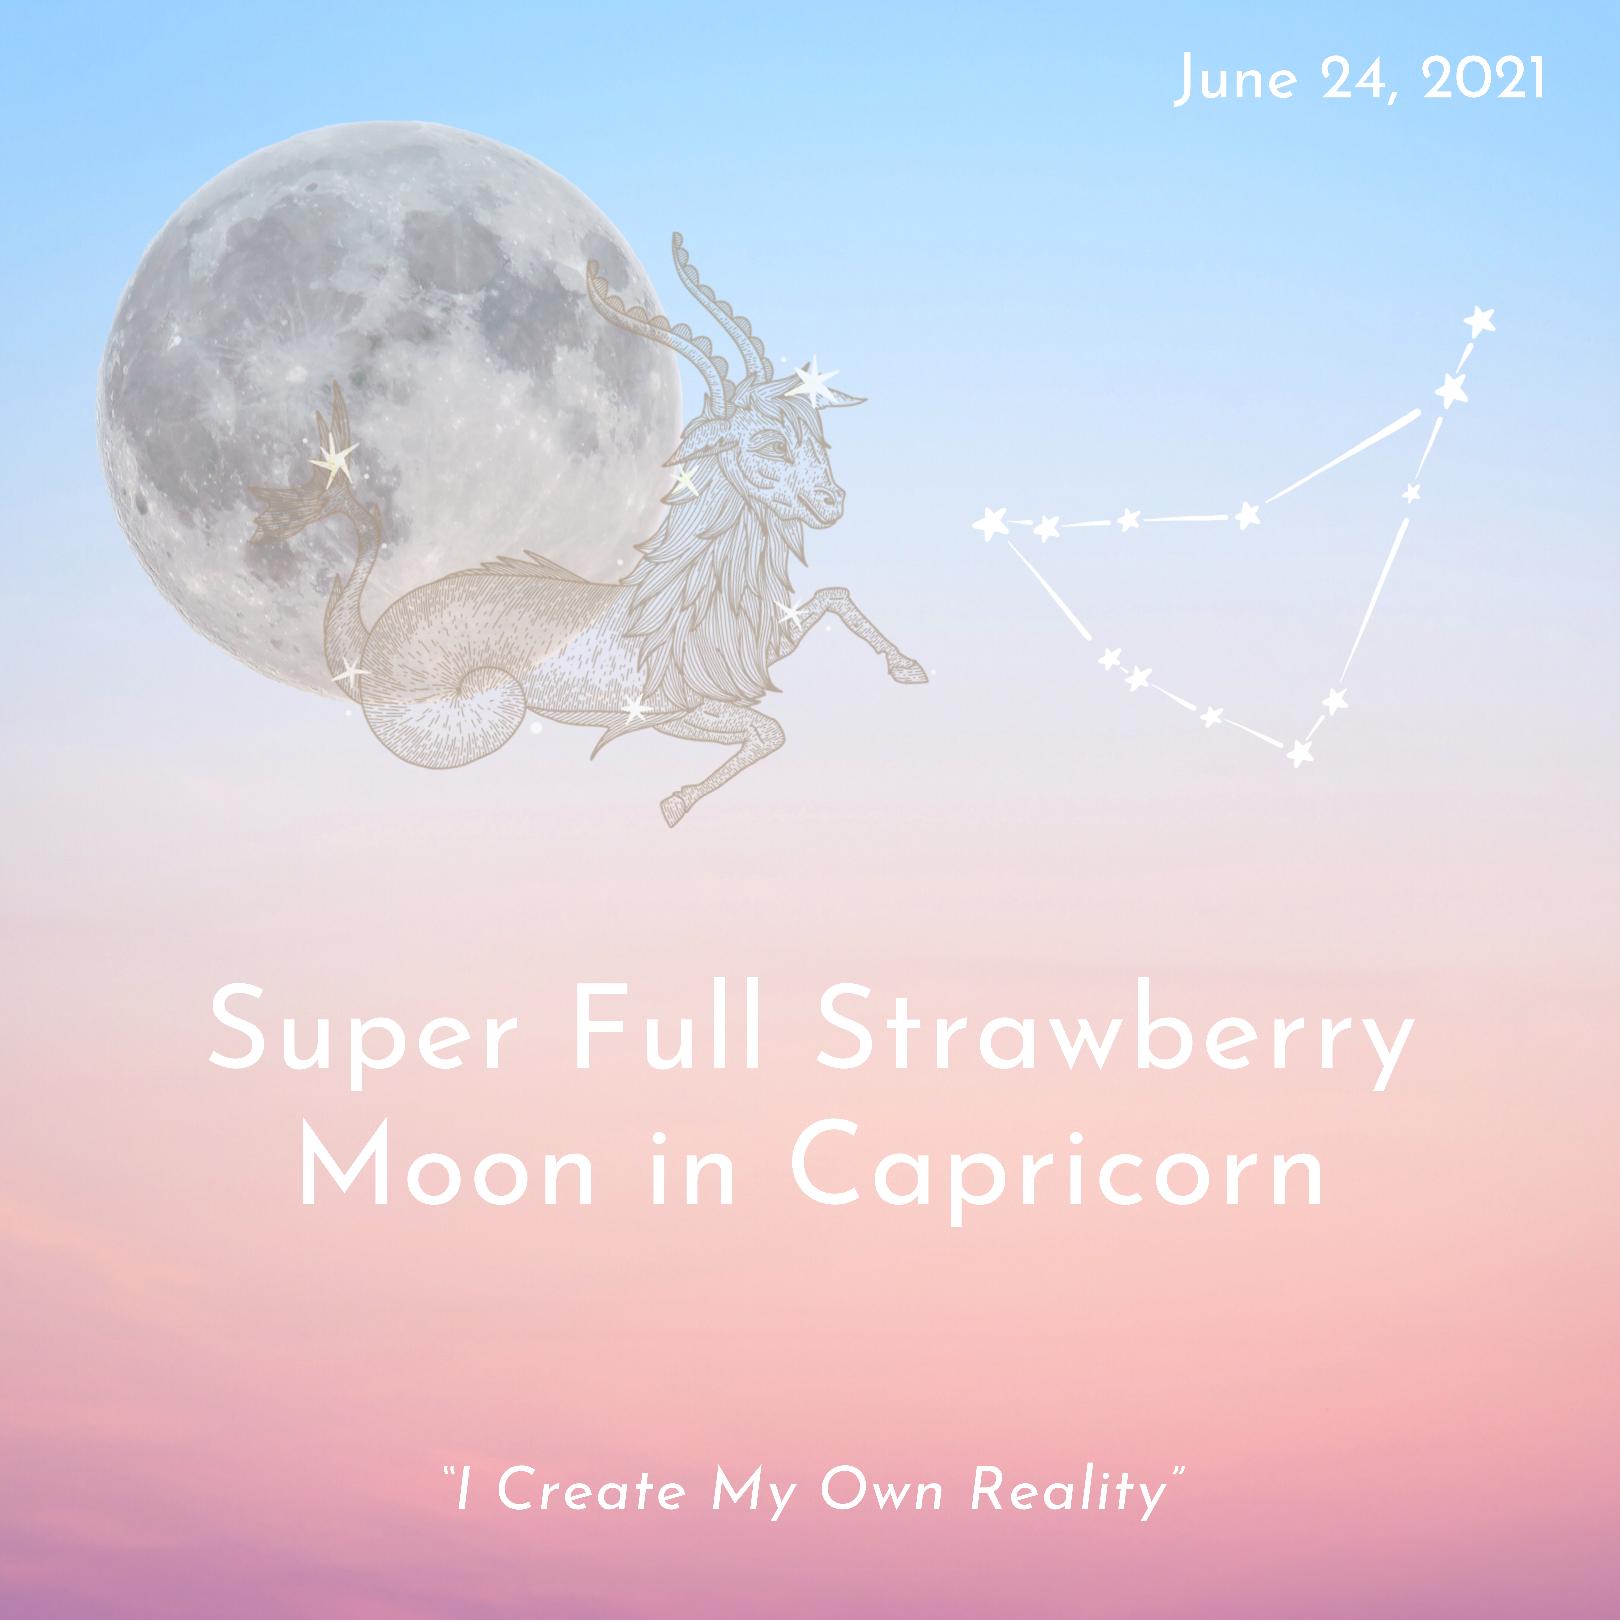 Astro Crypto: Bitcoin And The Full Pink Moon In Scorpio